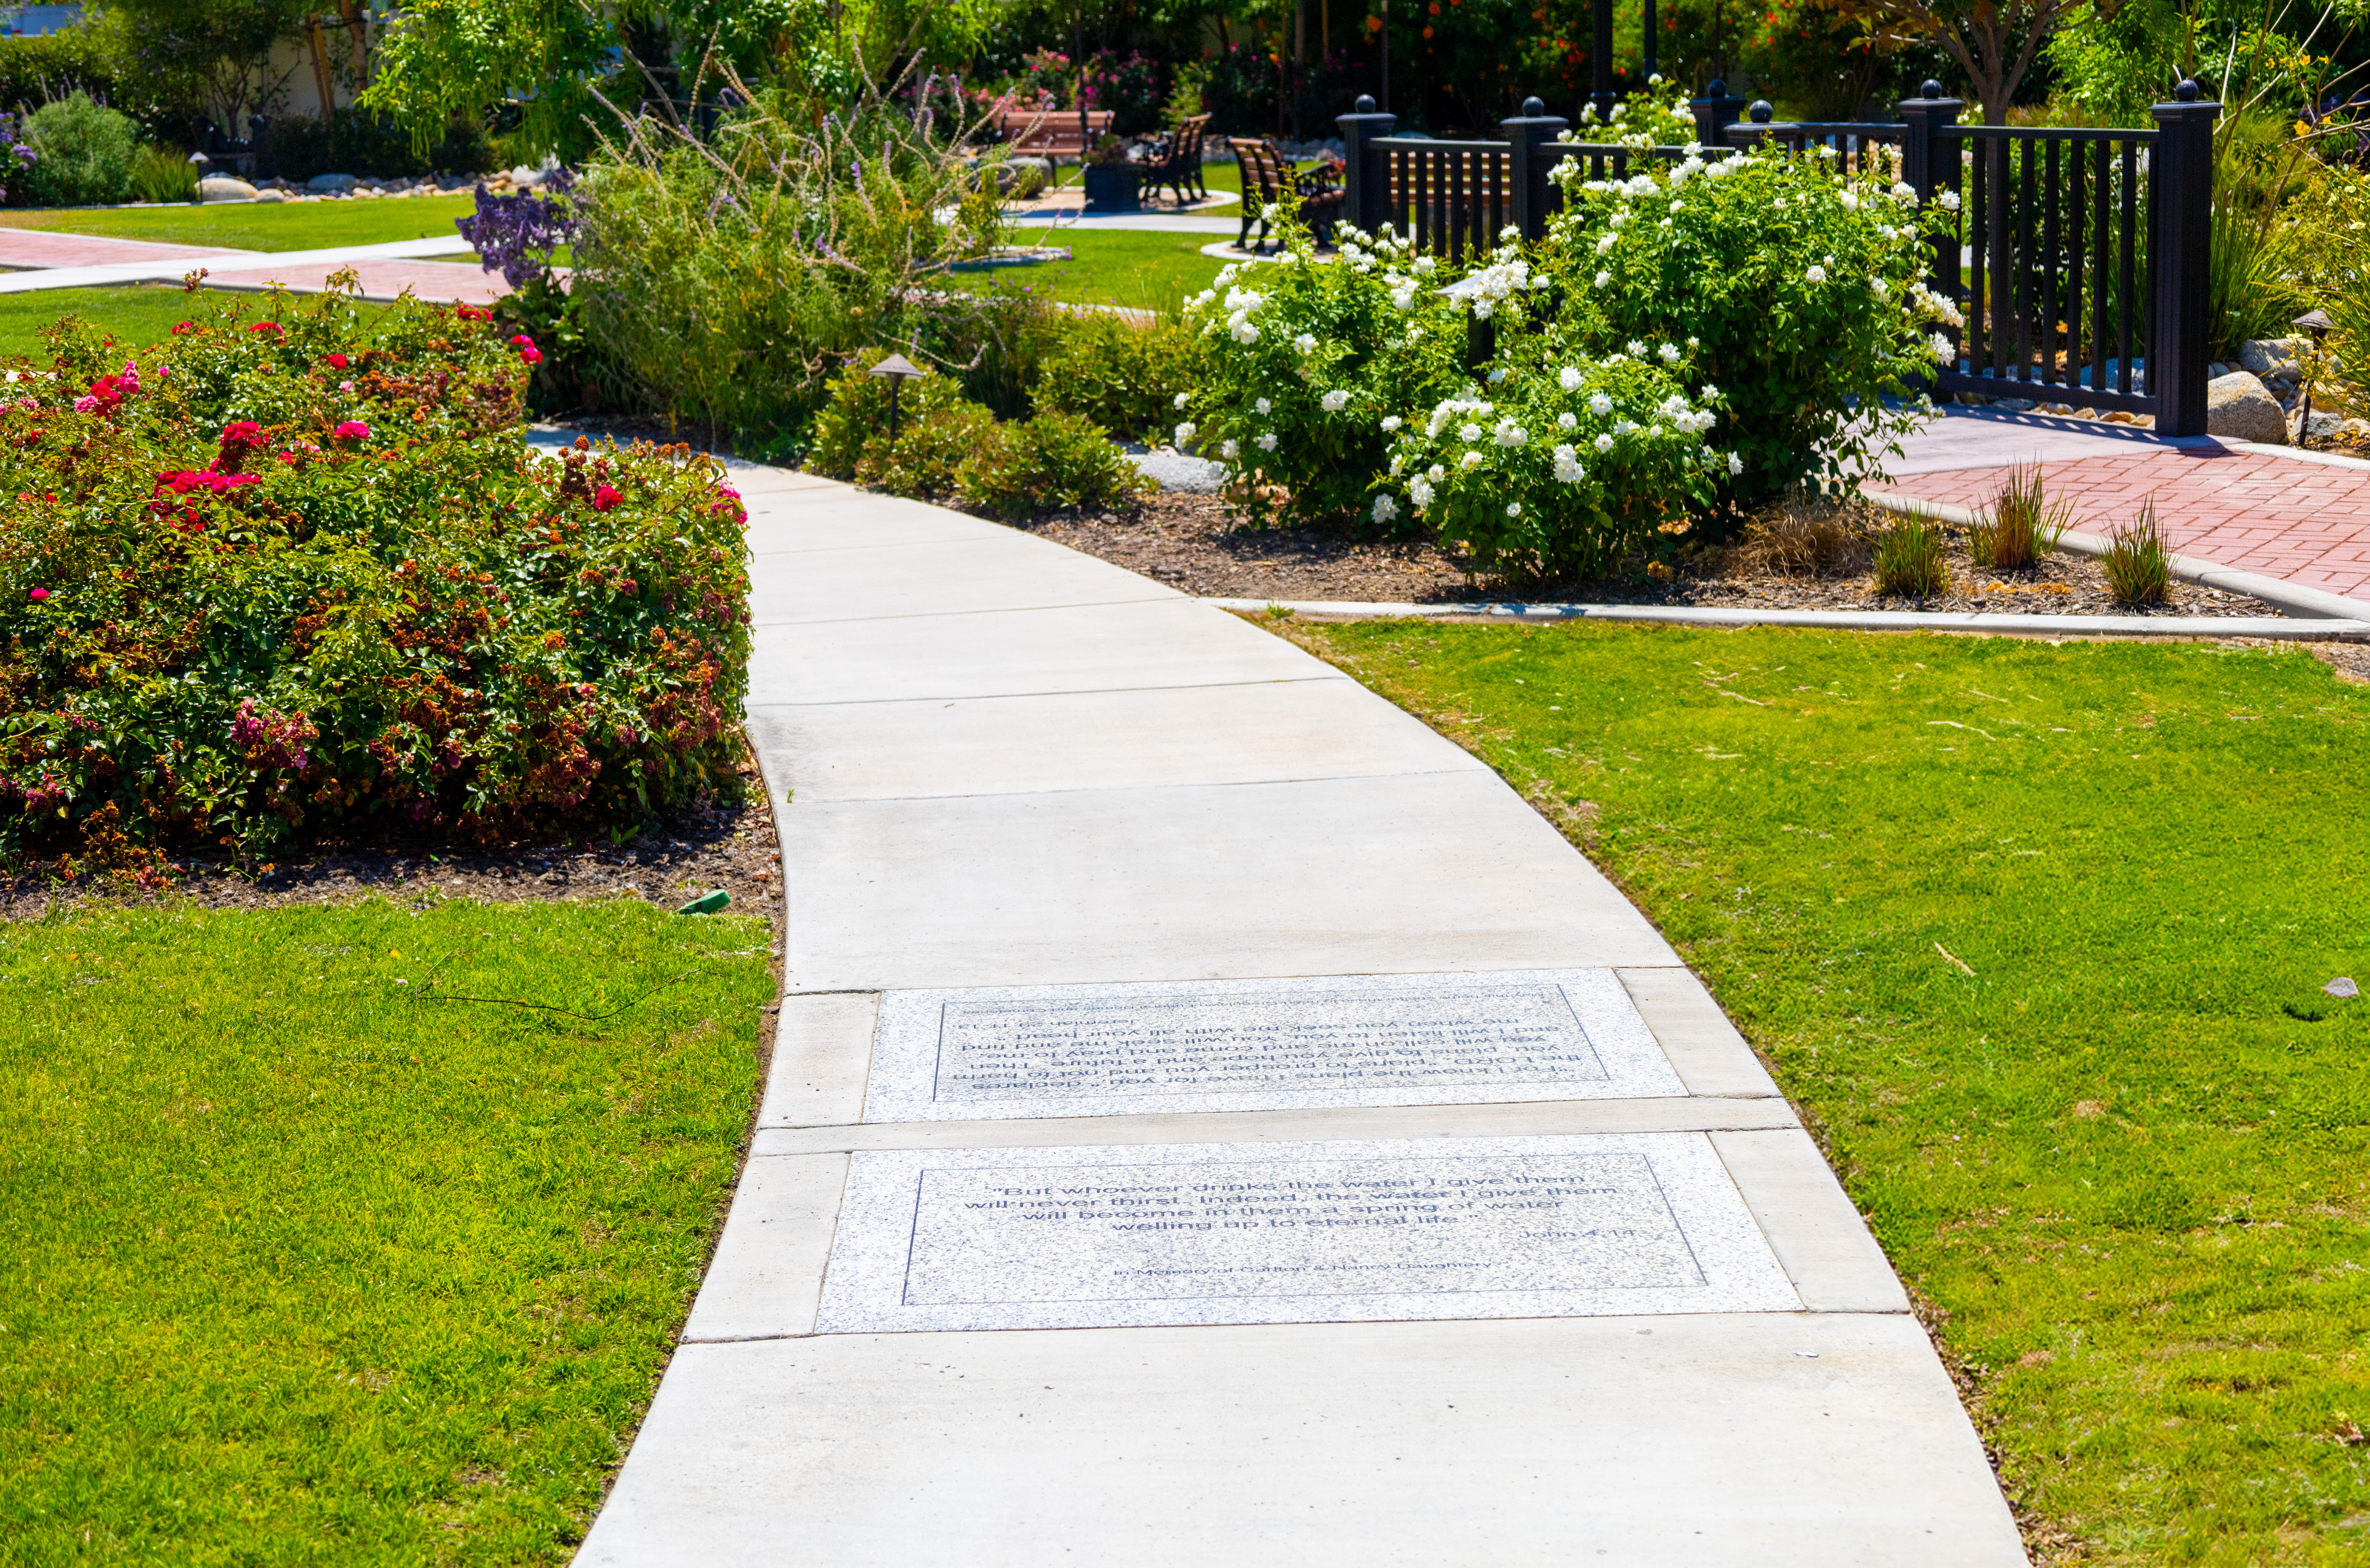 Hoffmann Hospice pathway with engraved memorial stones surrounded by lush gardens